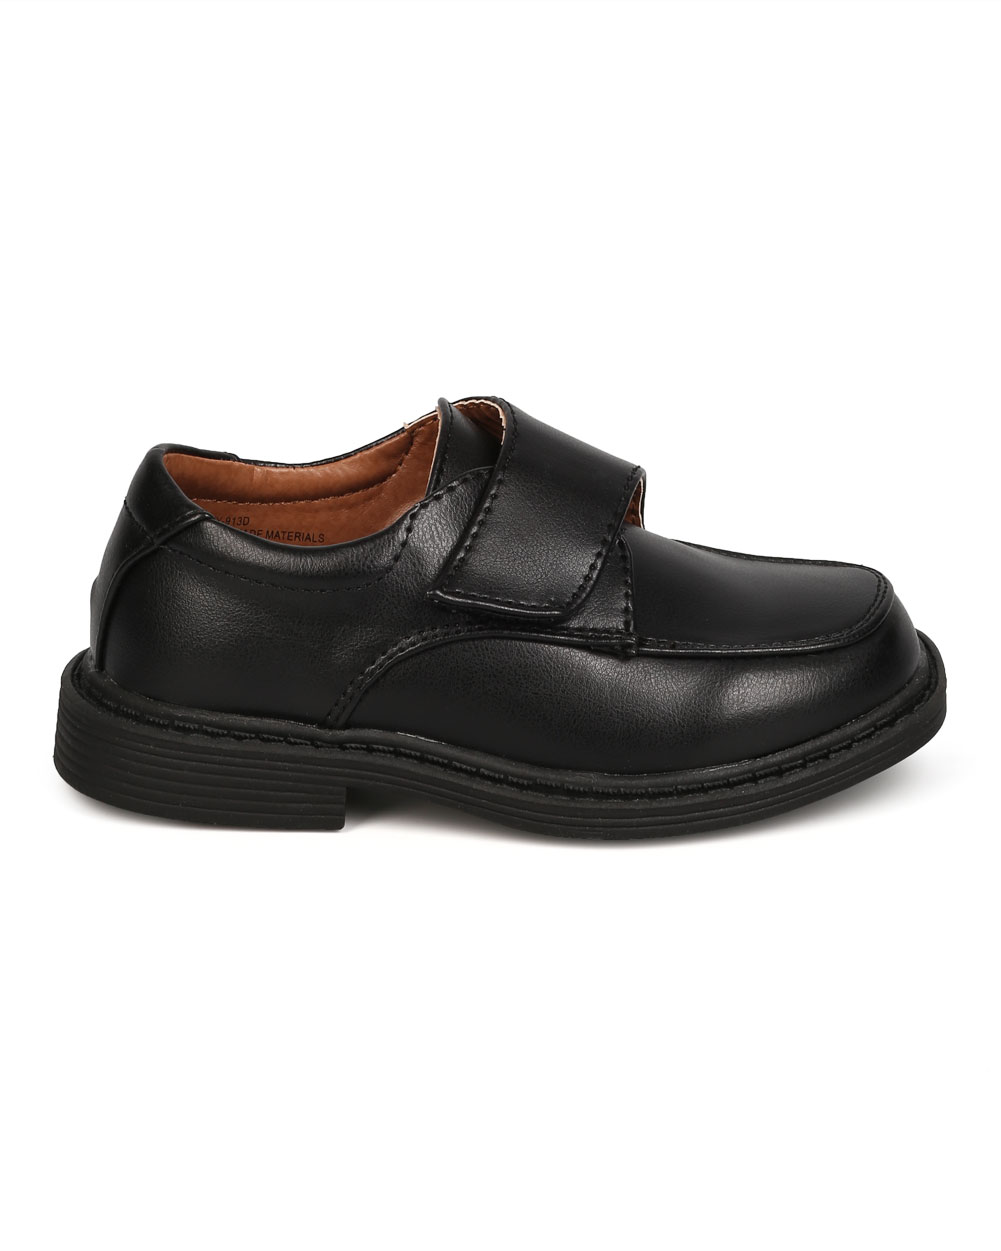 New Boy School Rider Ricky-913F Leatherette Square Toe Banded Dress Shoe - image 2 of 5